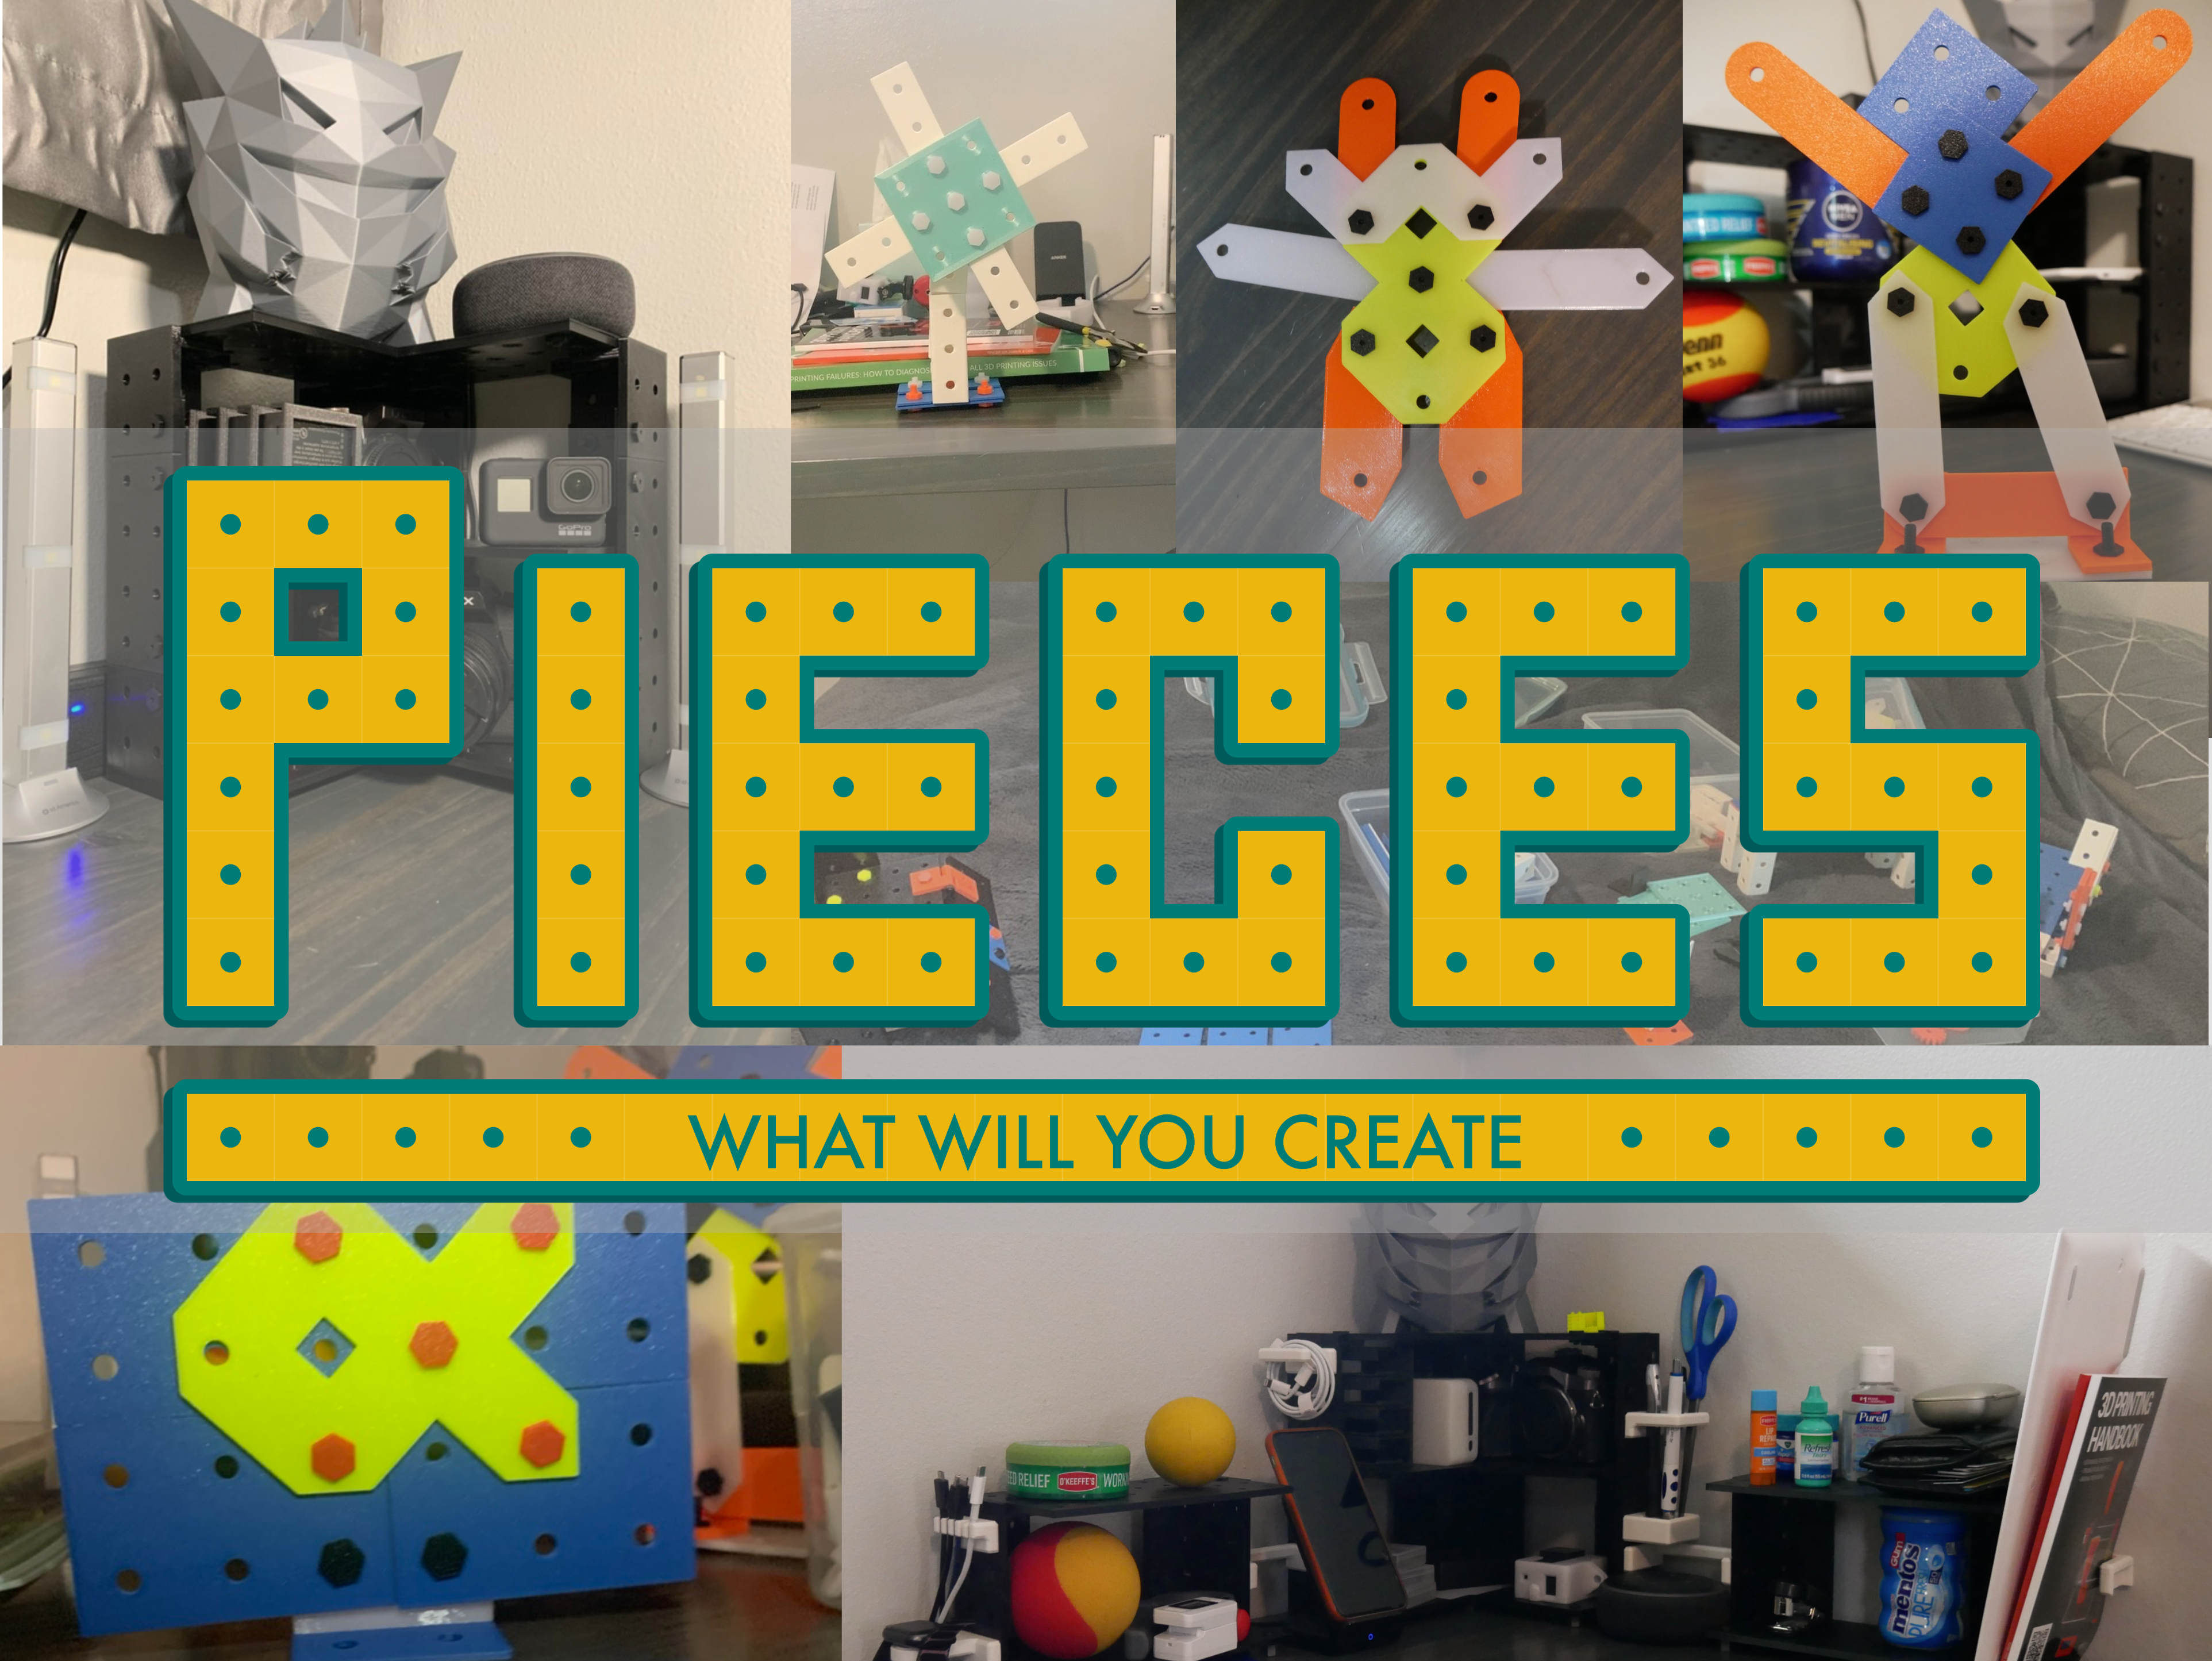 Pieces: What will you create?